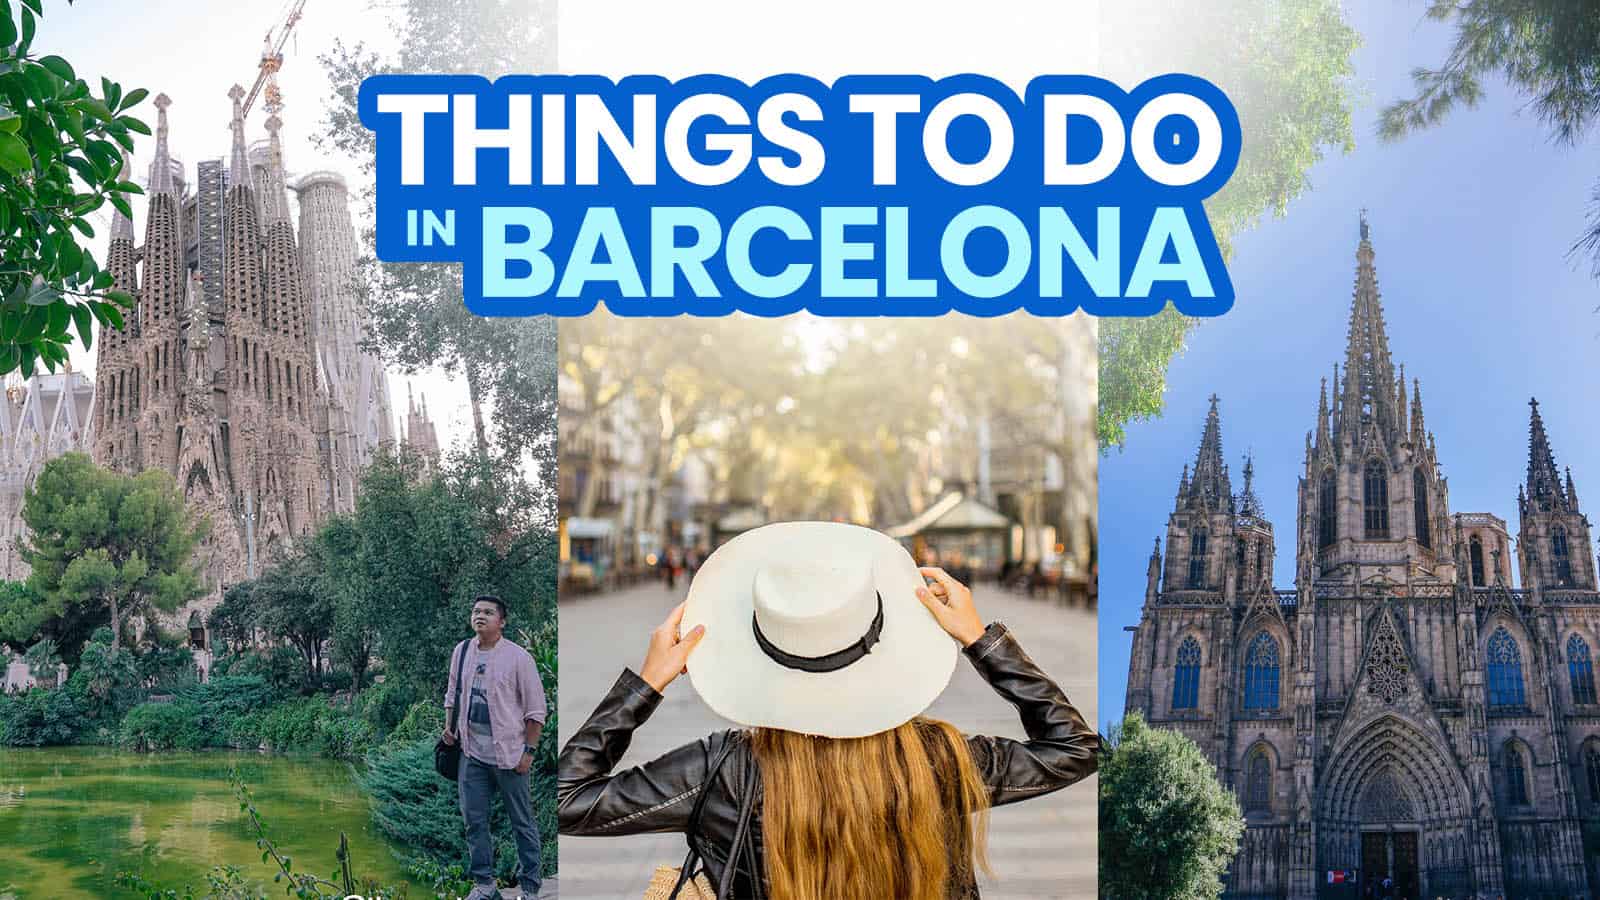 BARCELONA: 25 Best Things to Do & Places to Visit